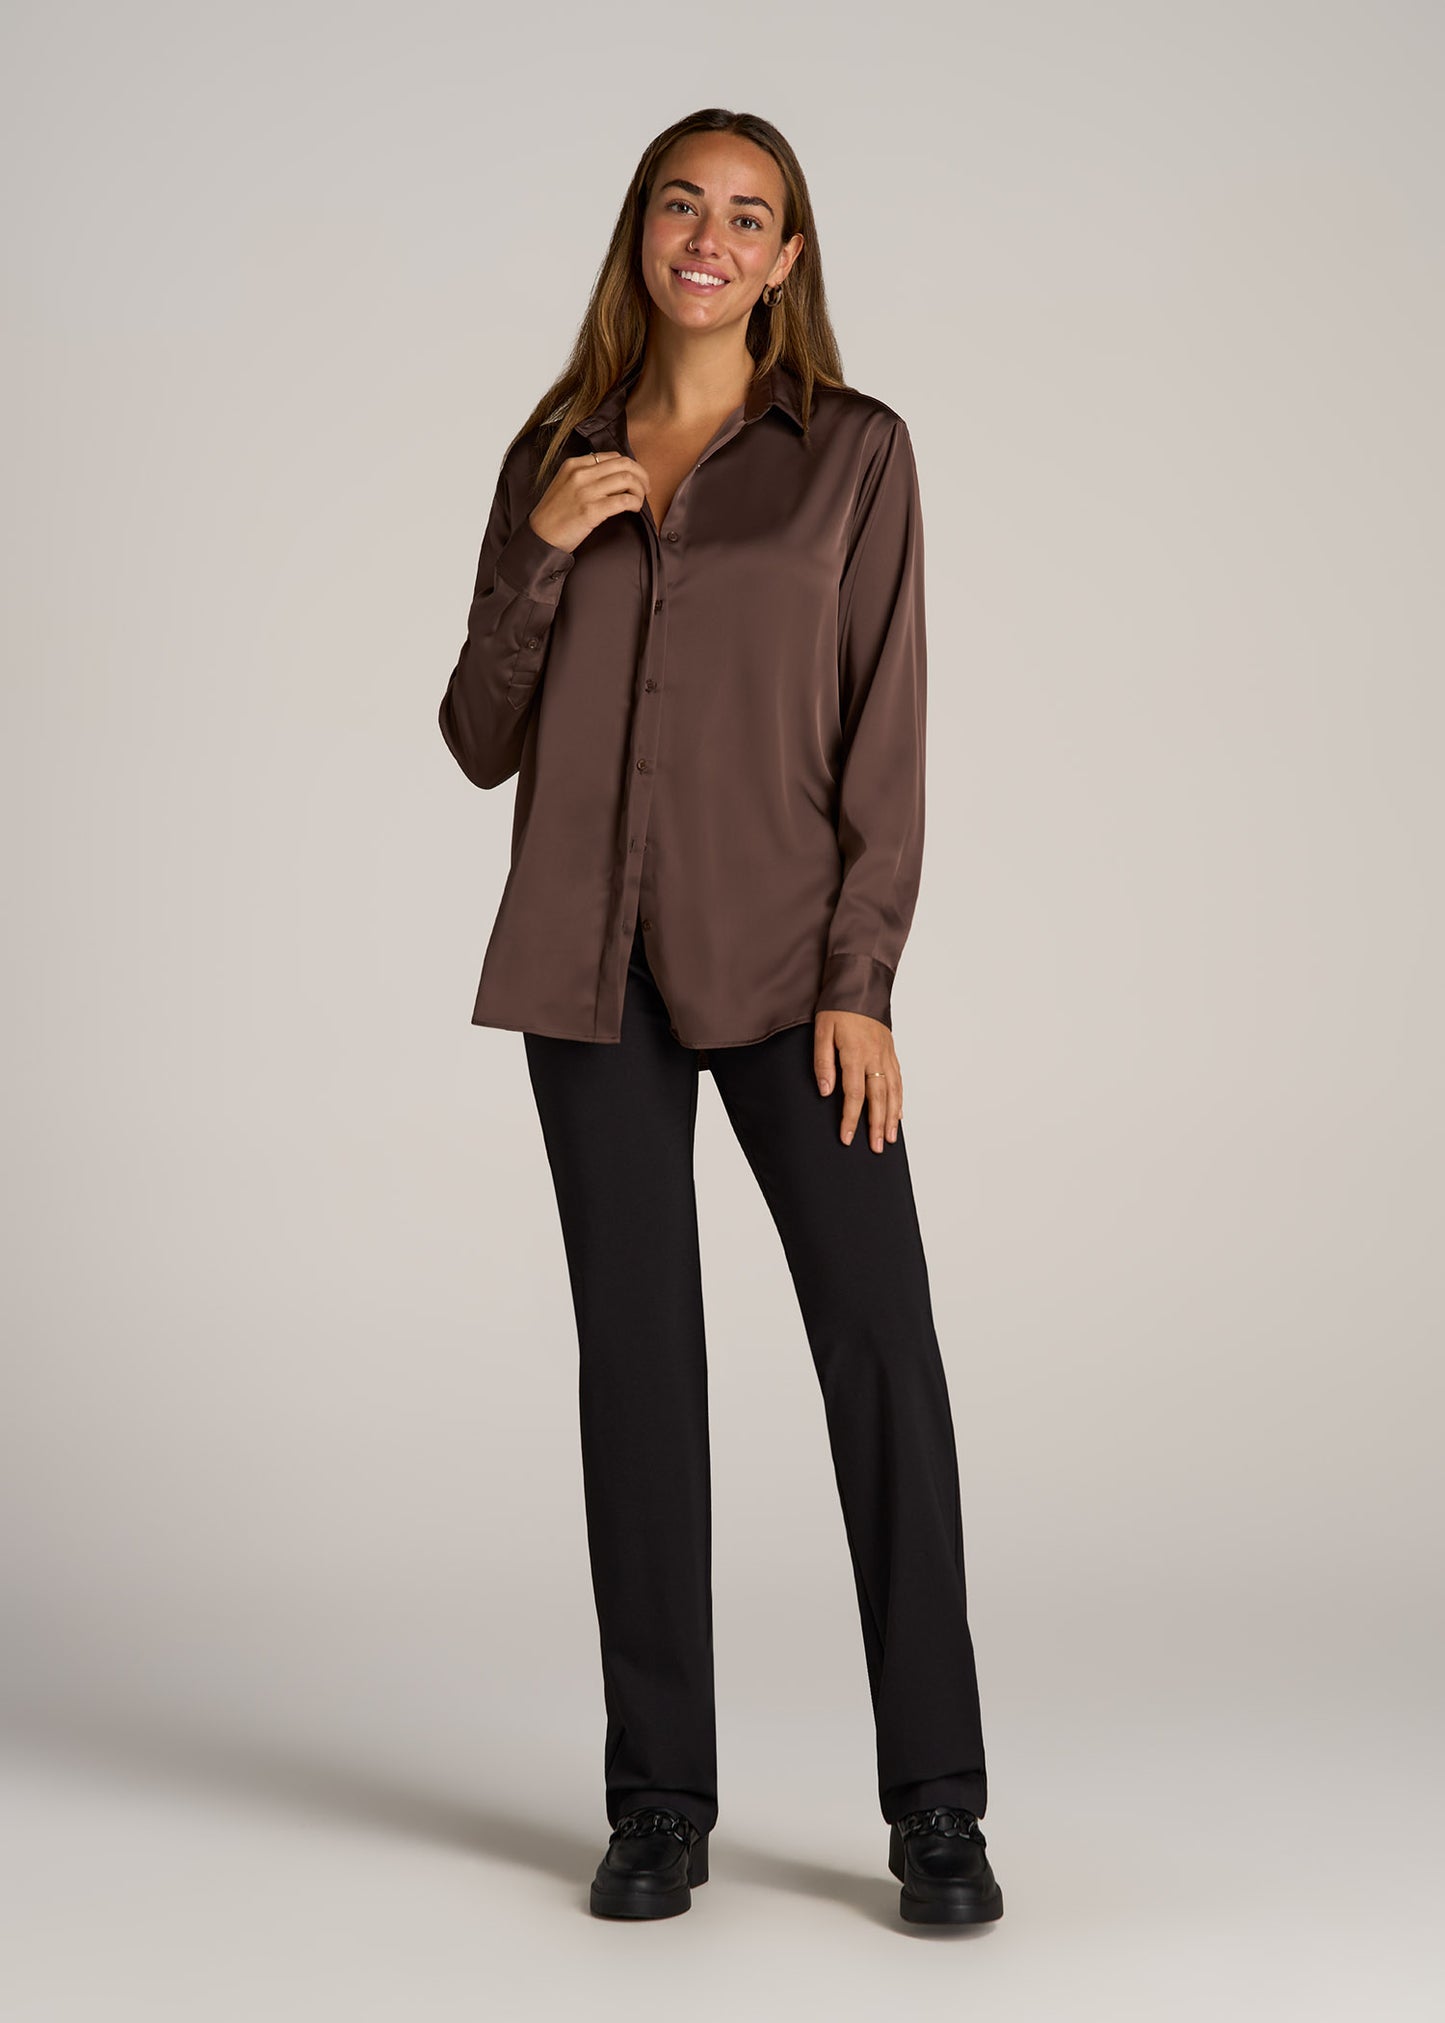 Work Clothes for Tall Women: Top Workwear Essentials – American Tall